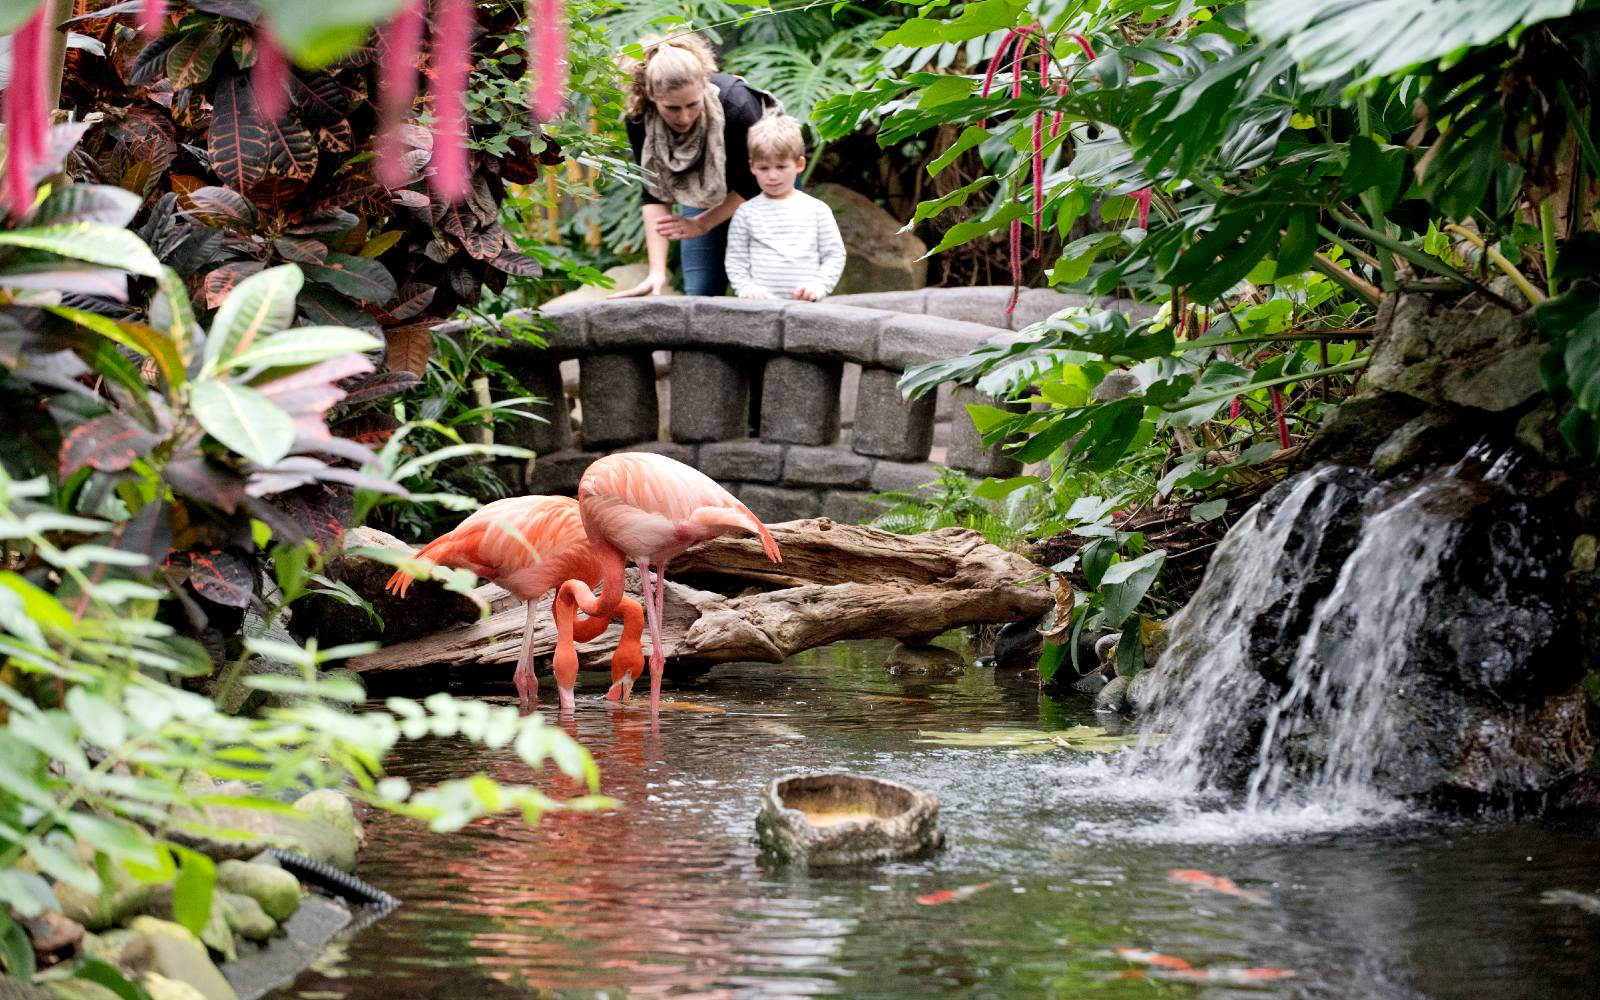 A mother and child admire a flamingo at Butterfly Gardens, Victoria BC